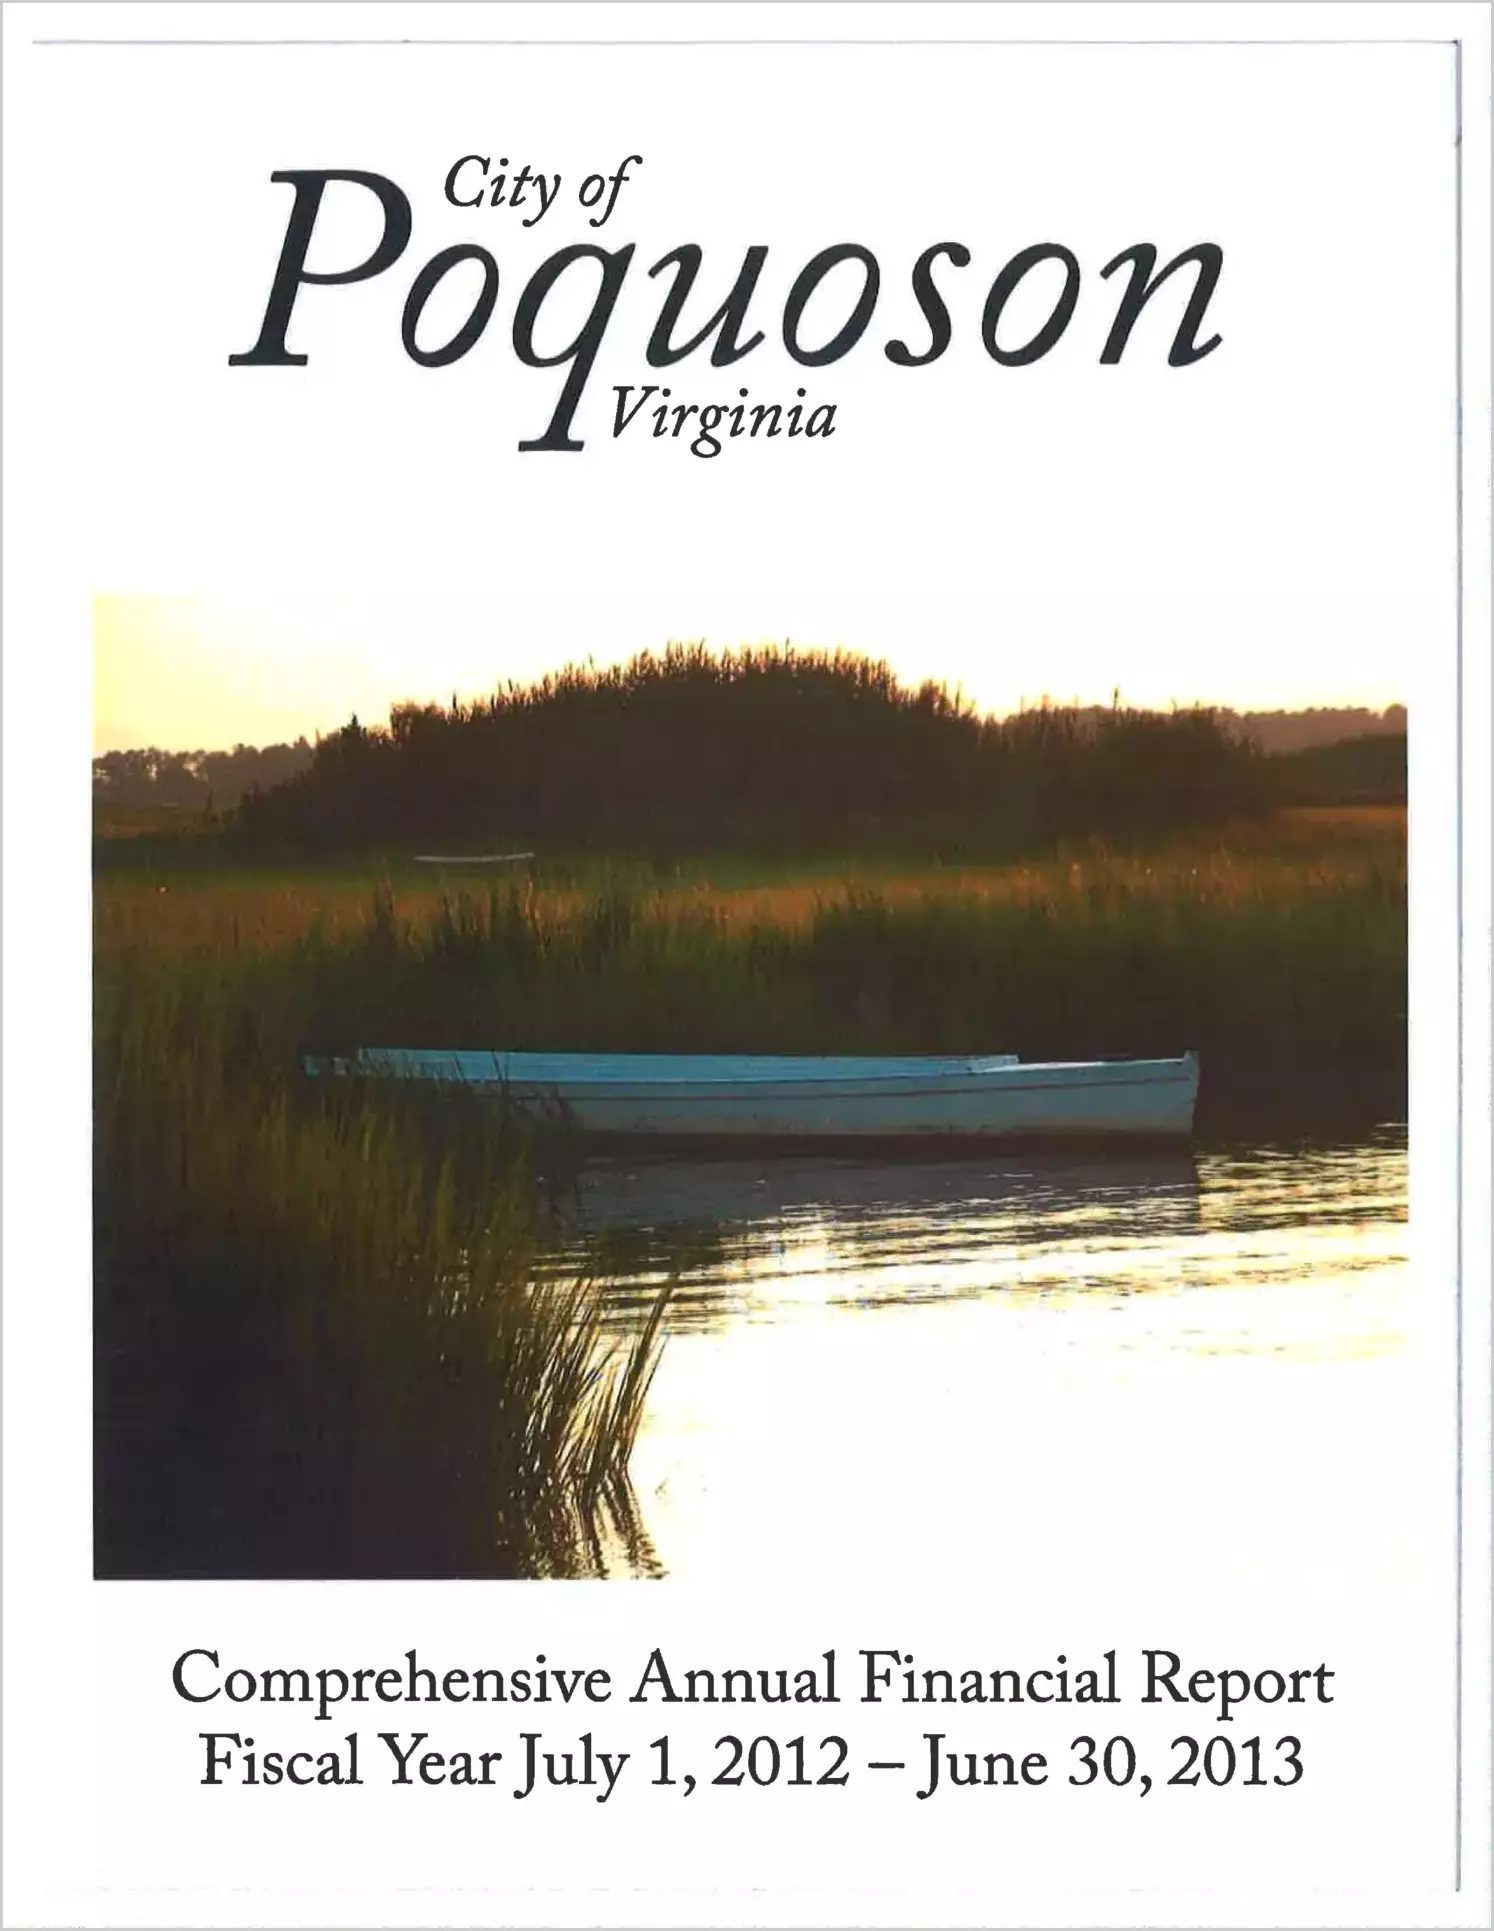 2013 Annual Financial Report for City of Poquoson